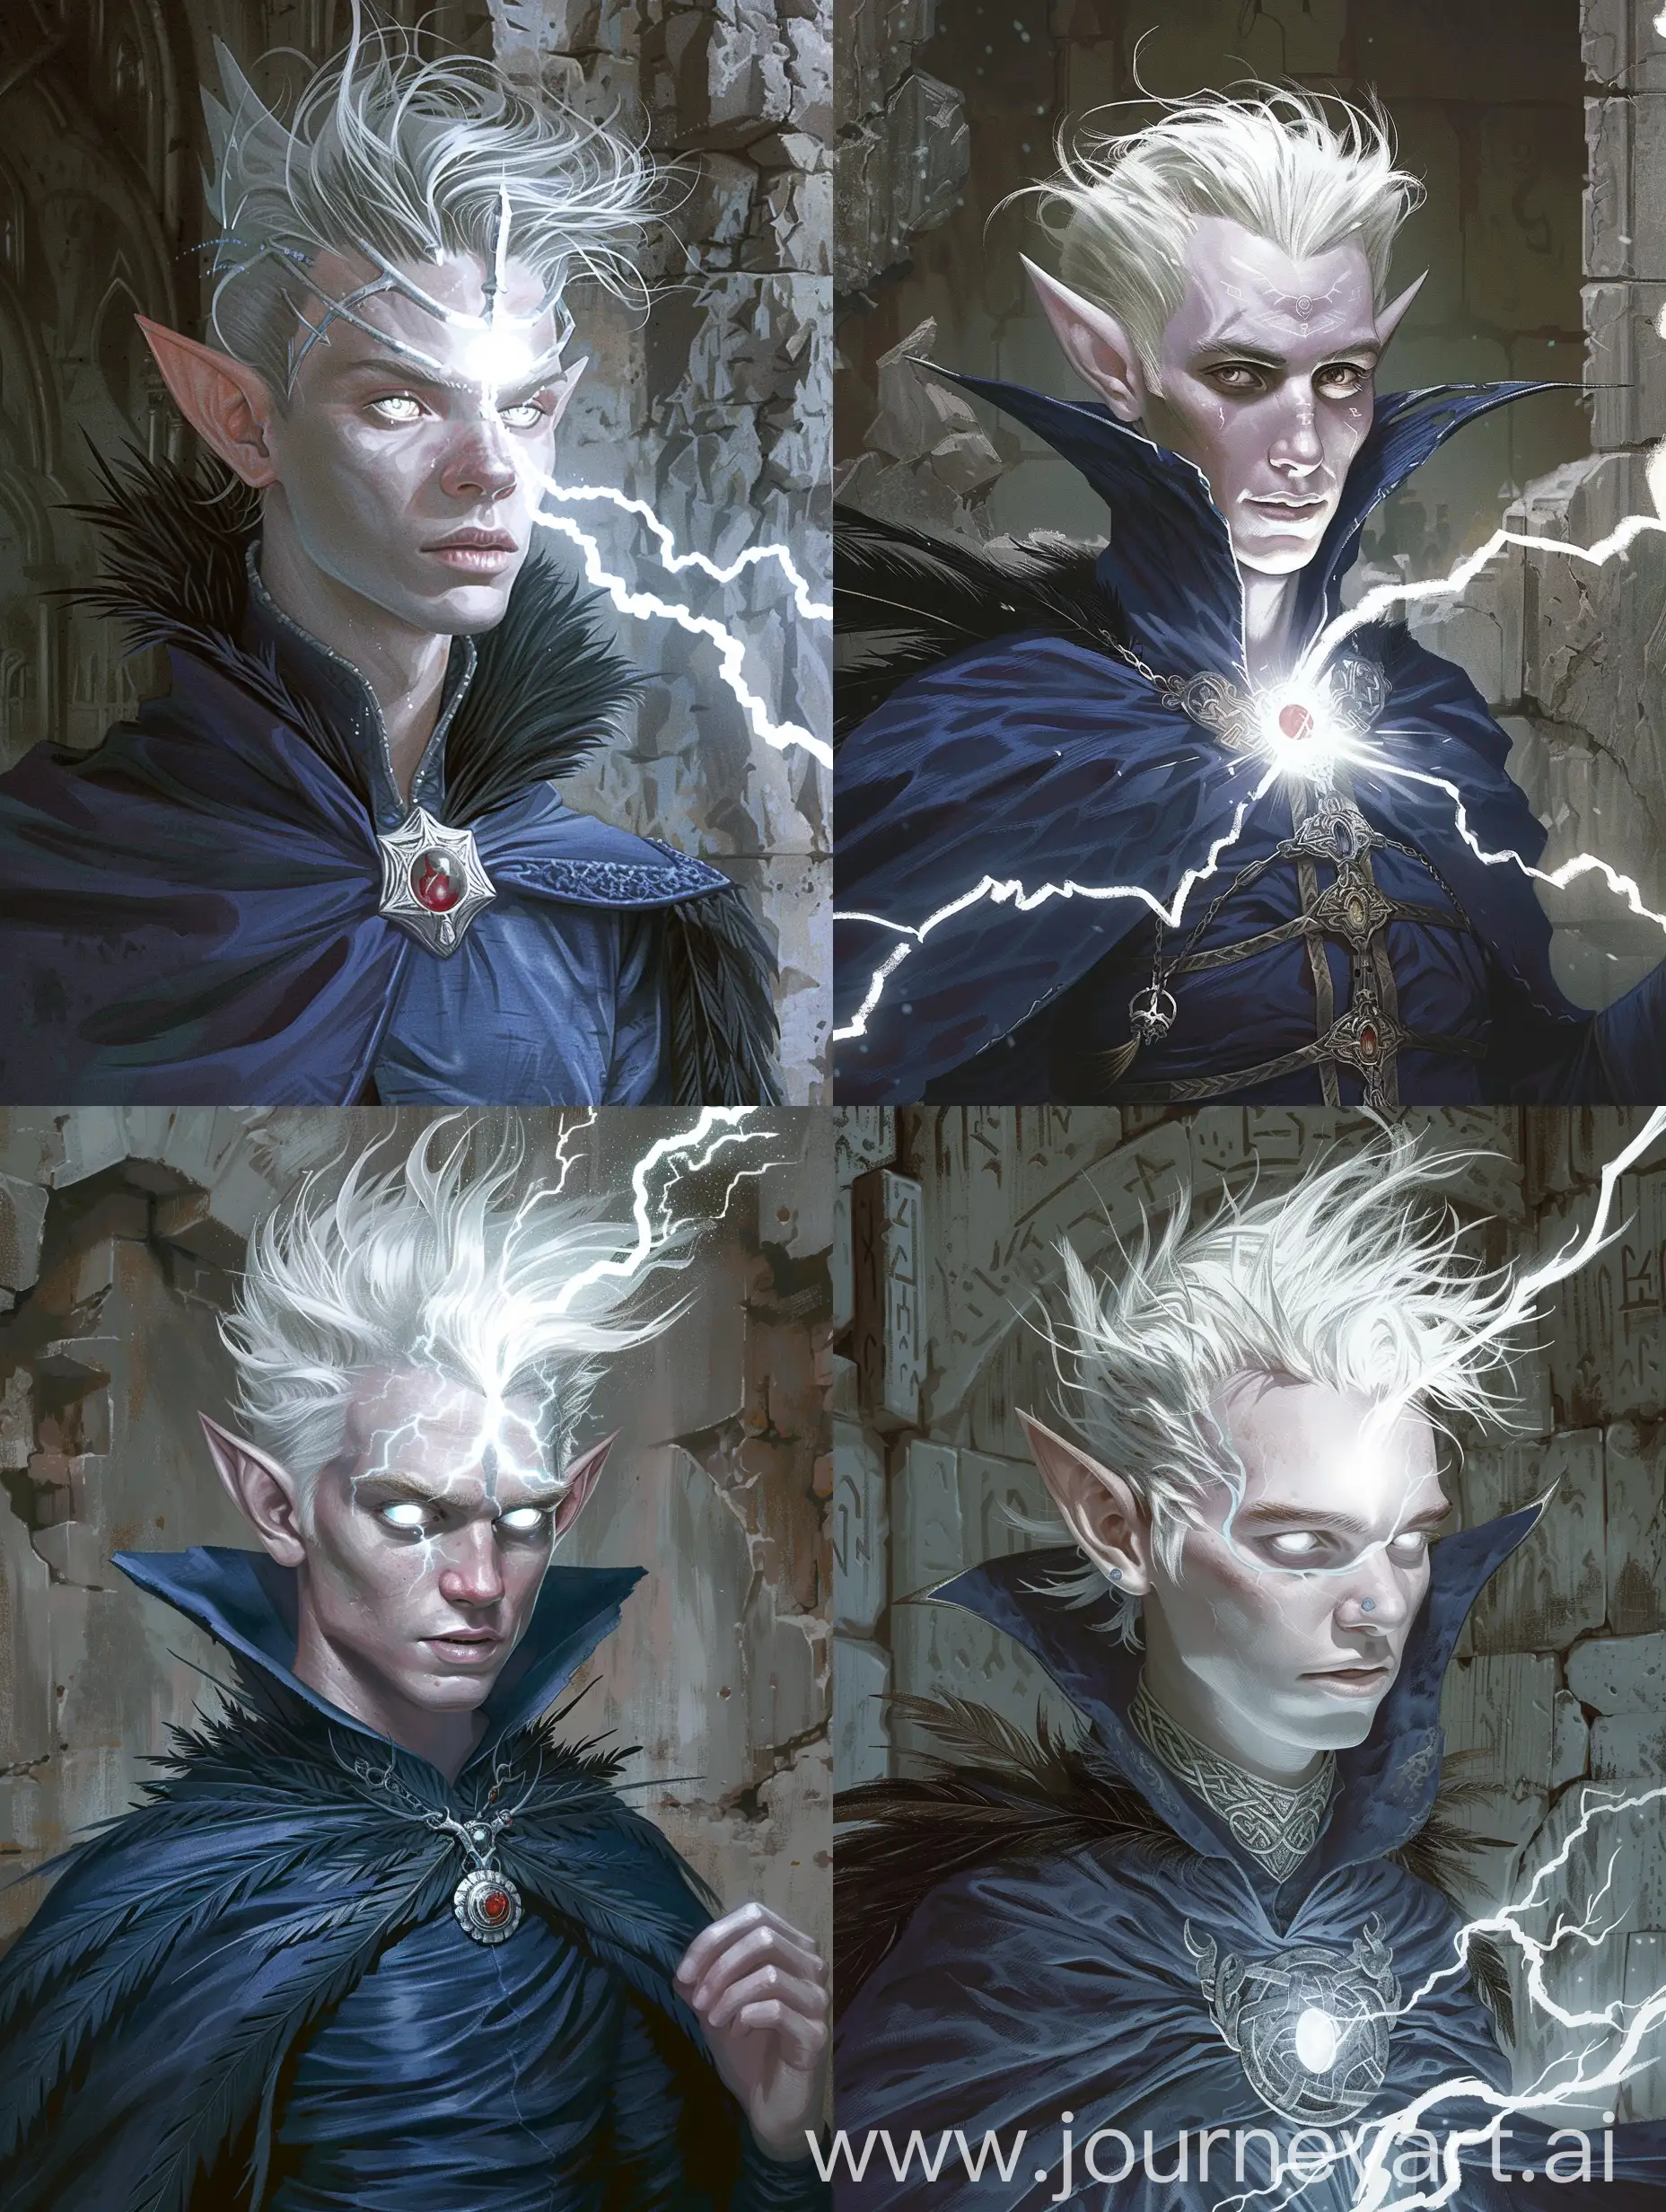 baldur's gate 1 character portrait, ((appearance: young human male, white skin color, oval shaped face with a broad forehead, curved protruding jawline, oval eye shape, chameleon eye color, character's eye's are glowing with transparent white light leaving a trail in the air, angled thin brows, button nose with an upturned wide point and straight wide in the middle nasal bridge, short in the length bow shaped lips, long wavy light-brown hair going over character's shoulders, bushy slightly curved mustache with a stubble, silver minimalistic crown sits on character's head compressing his hair down)) ((apparel: character wears an indigo colored silk cloak with a high collar with it's shoulder's covered by black feathers, the cloak has overhead shoulders making character's profile seem a little more square, ponderous silver amulet with a shining crimson gem in it worn over the collar)) ((pose: only upper half of the body is in the frame, character is slightly turned away, character with his both hands conjures a spell that took a form of bright shining sphere of white lighting that highlights surroundings and the character's features, character manically oversees his spell)) ((background: background is made of an ancient ruin walls that has no source of lightning except character's spell)) ((no elf, elf ears, pale skin, white hair, short hair, silver hair, grey hair, gray hair, clean shaven, no facial hair, lightning, flowing hair))